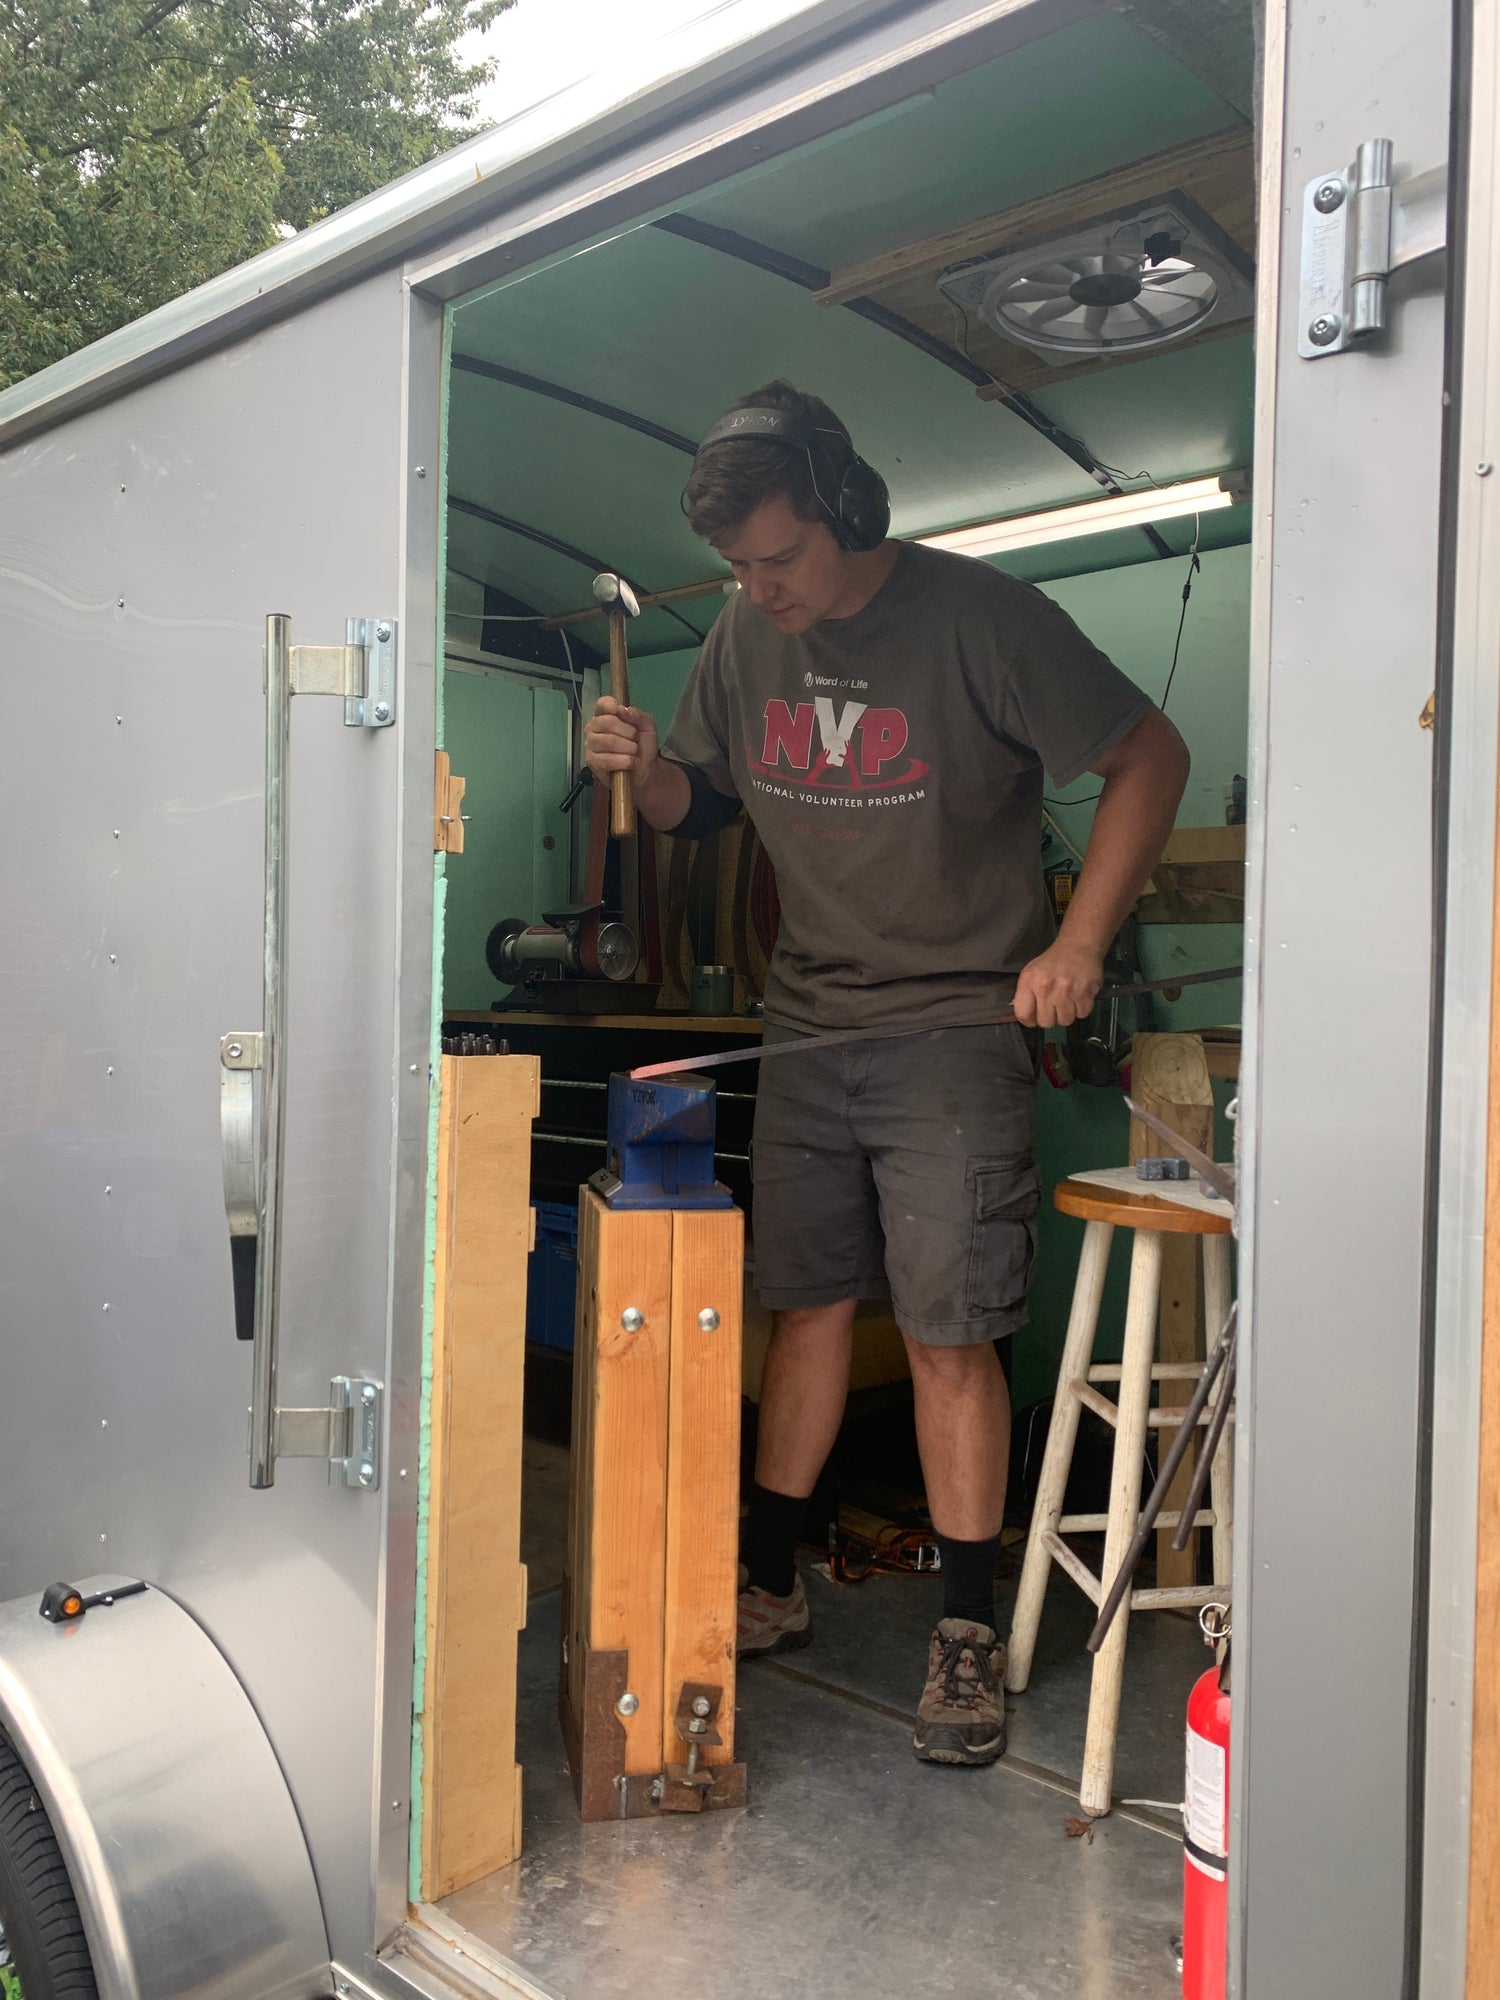 Hogan working out a of portable shop trailer